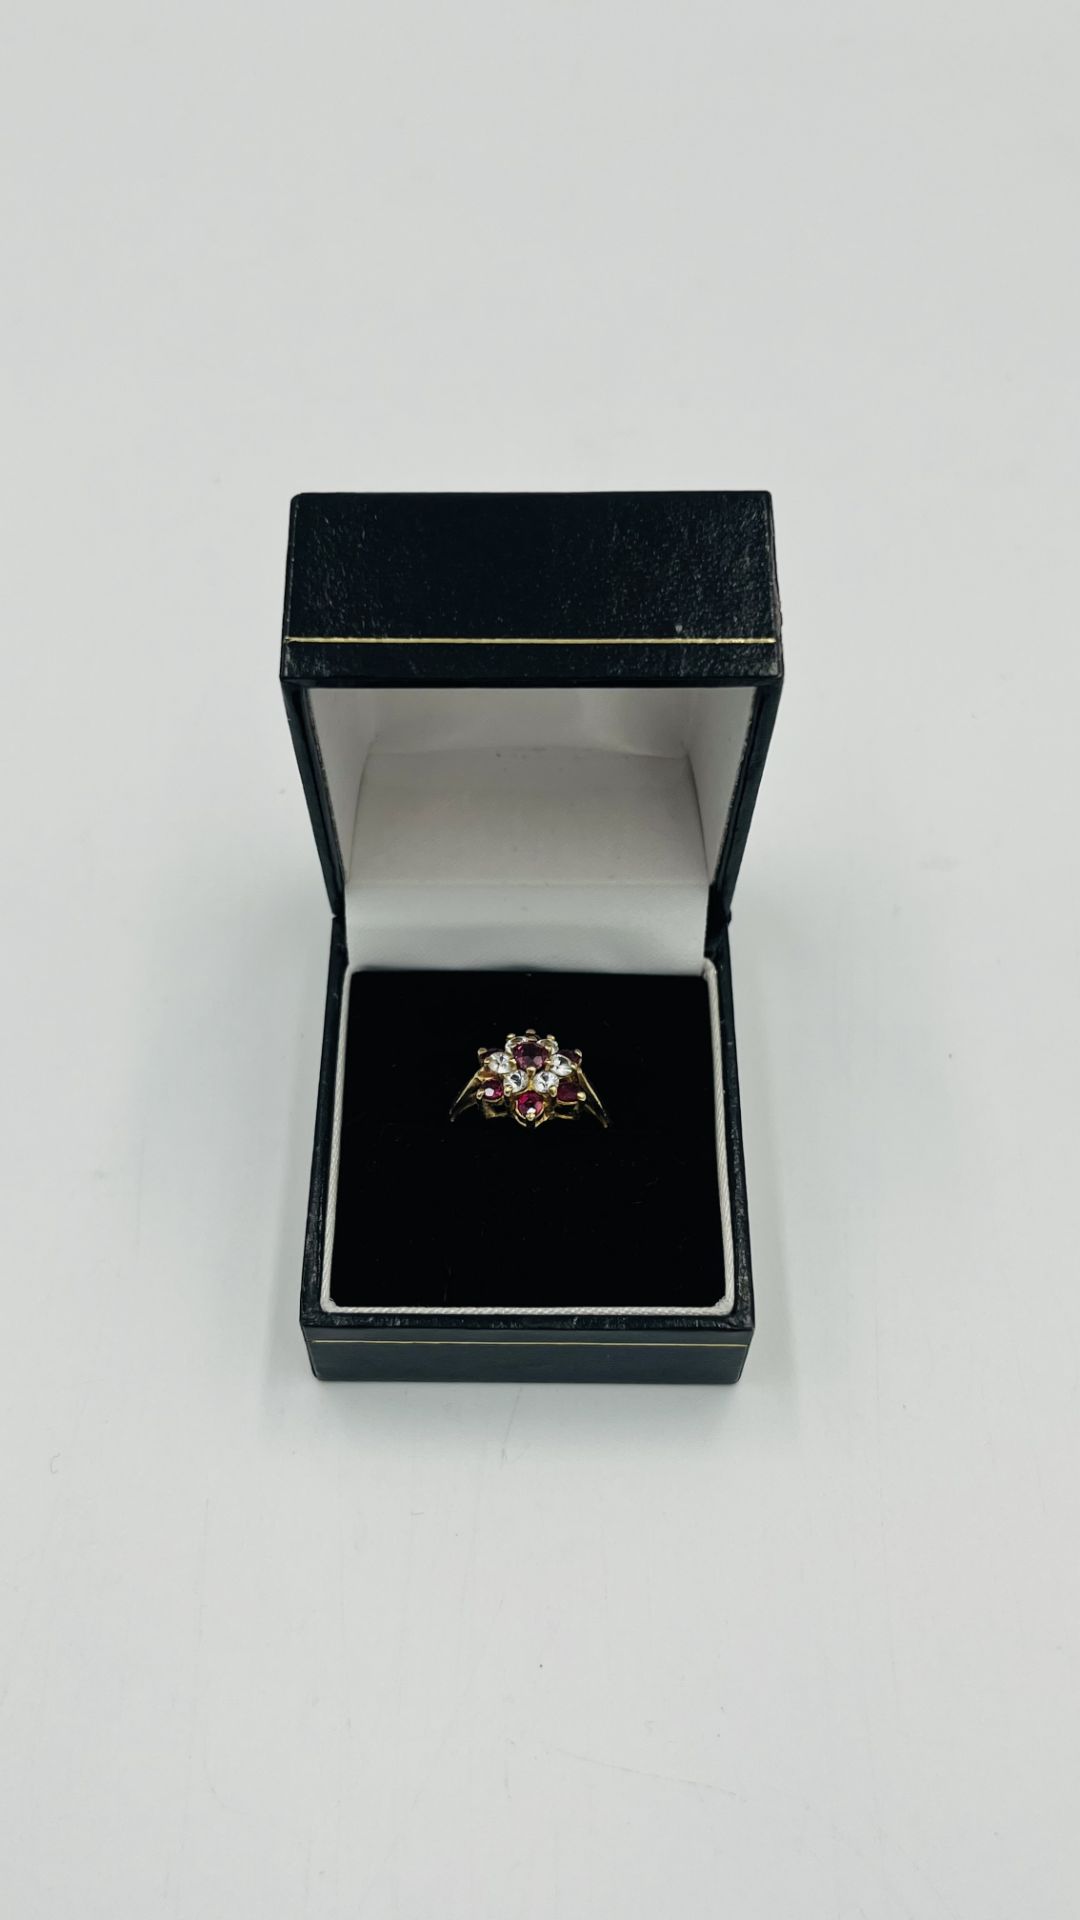 9ct gold daisy ring - Image 2 of 7